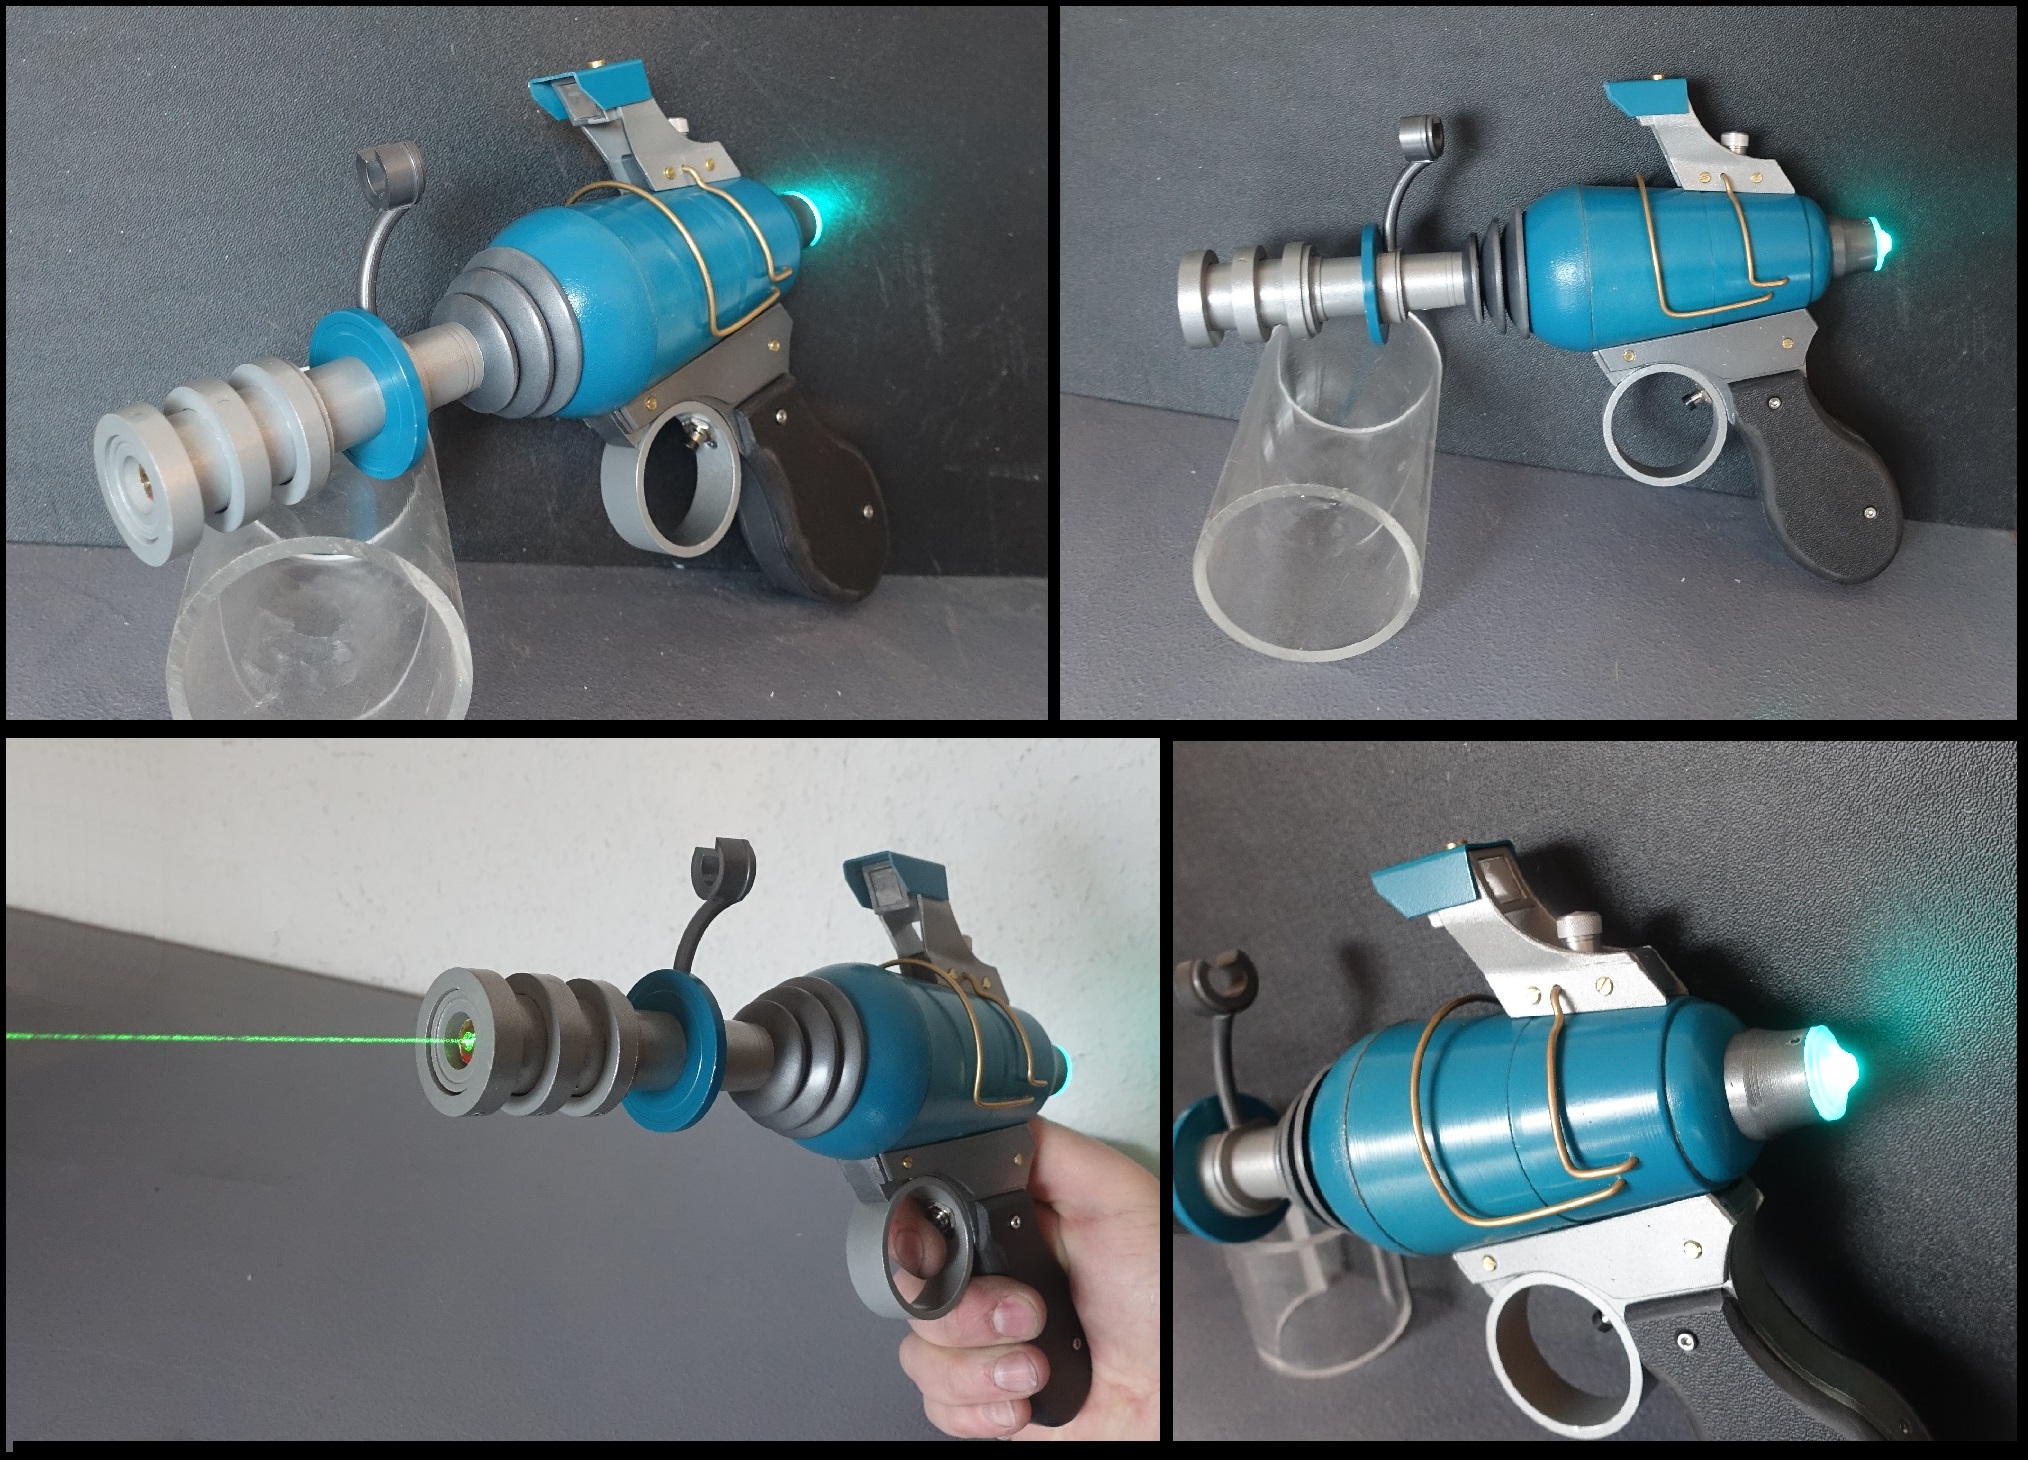 Classic Raygun, personalized made of steel